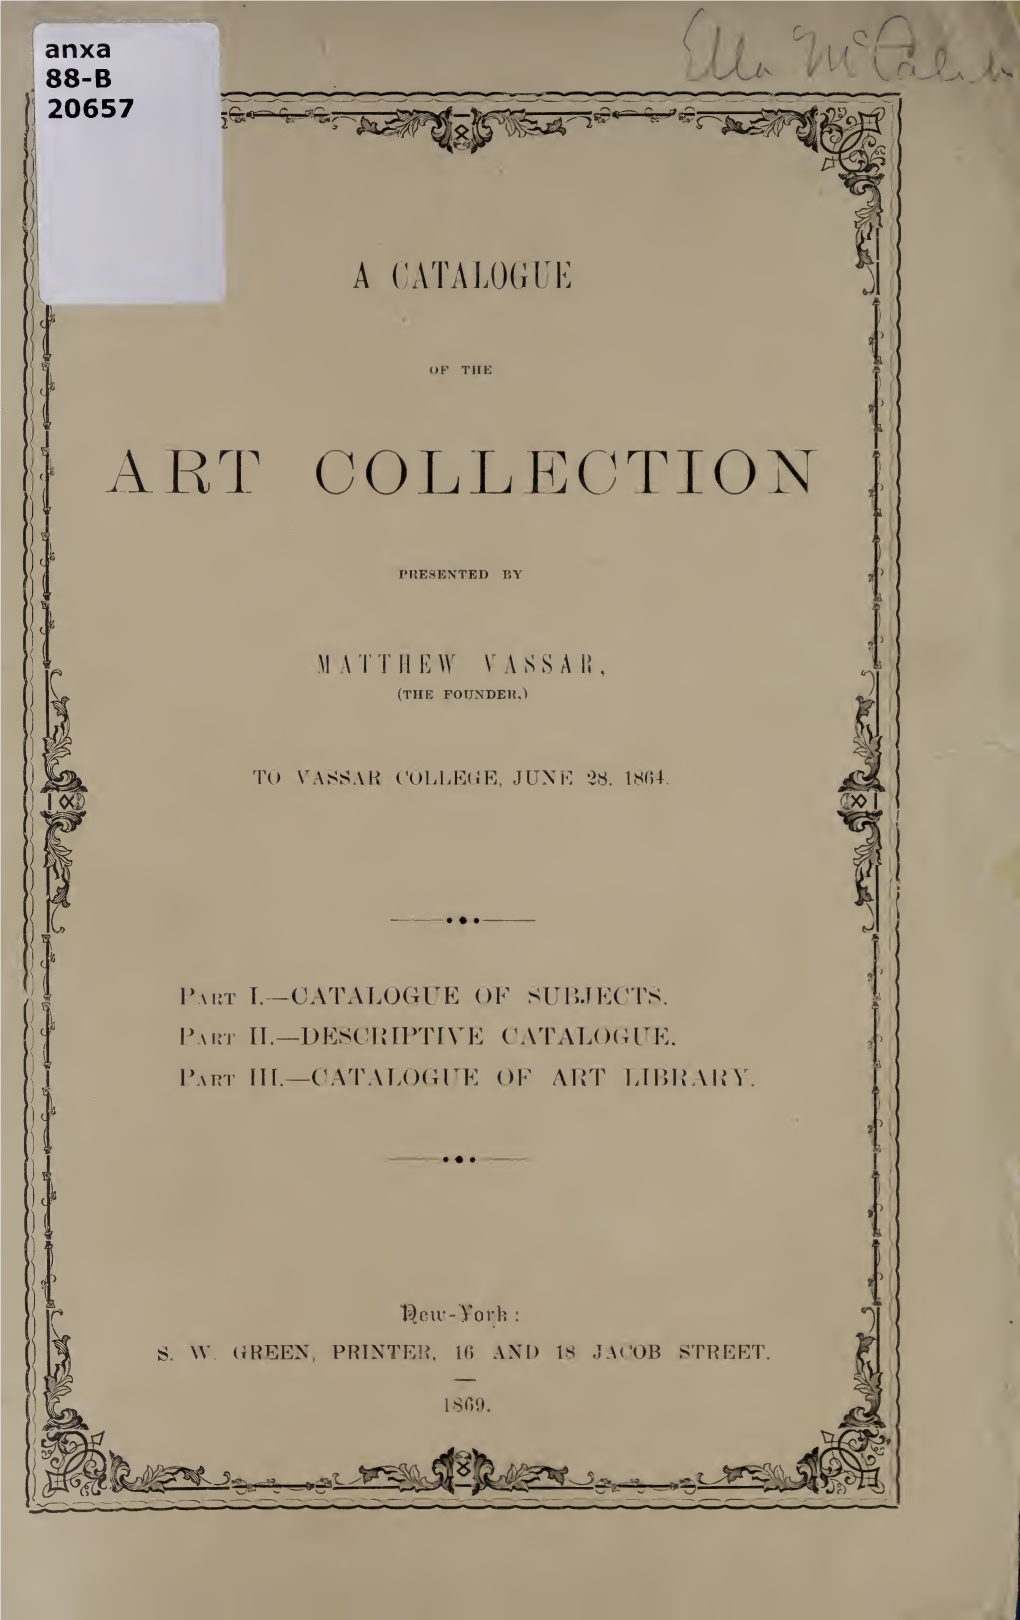 A Catalogue of the Art Collection Presented by Matthew Vassar To